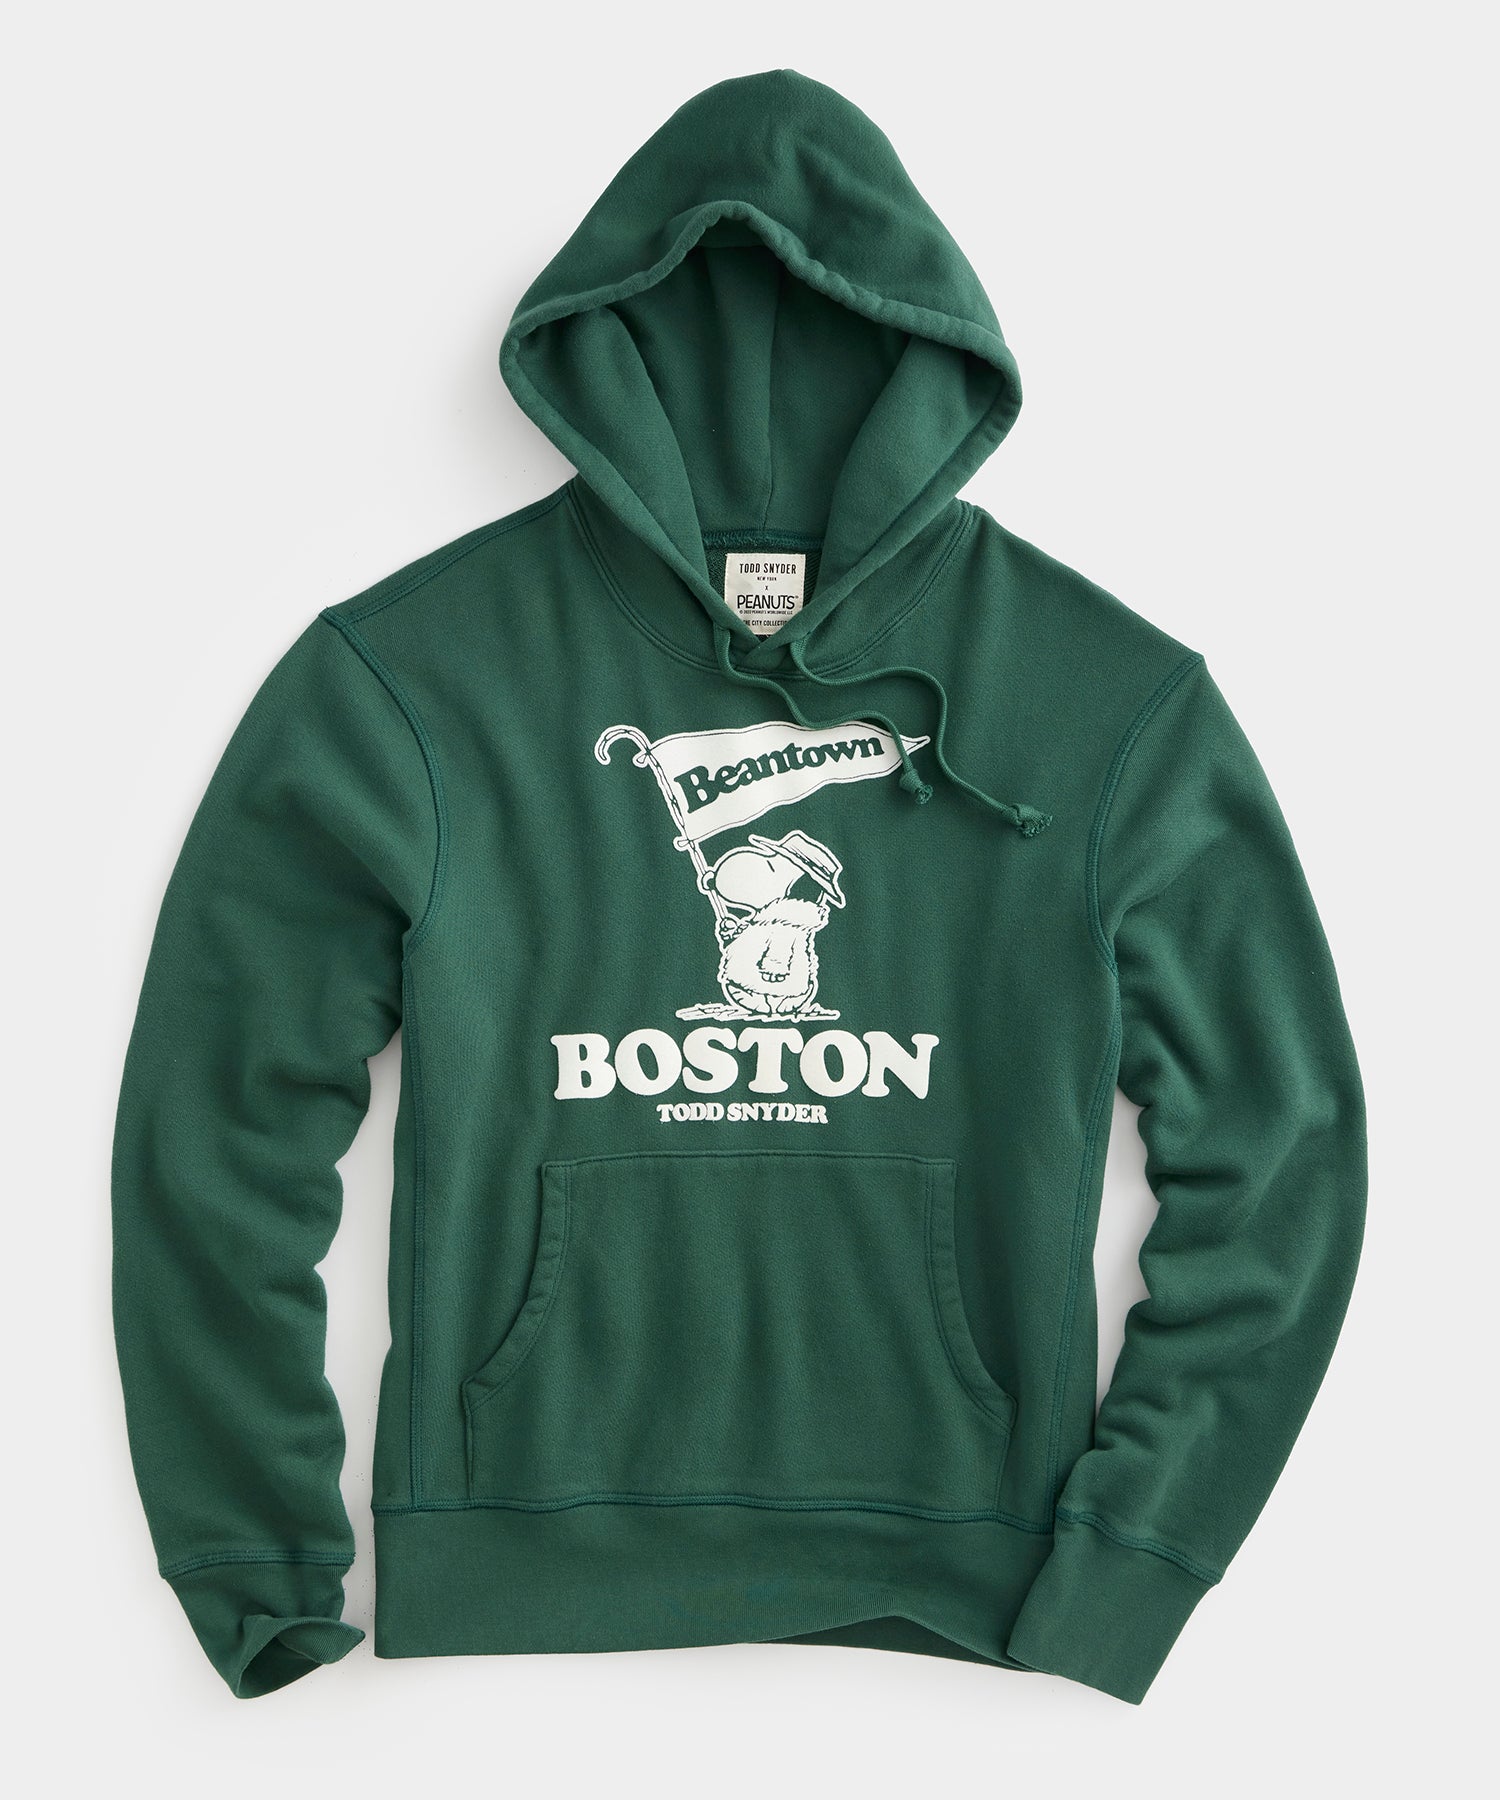 Todd Snyder x Peanuts French Terry Boston Hoodie